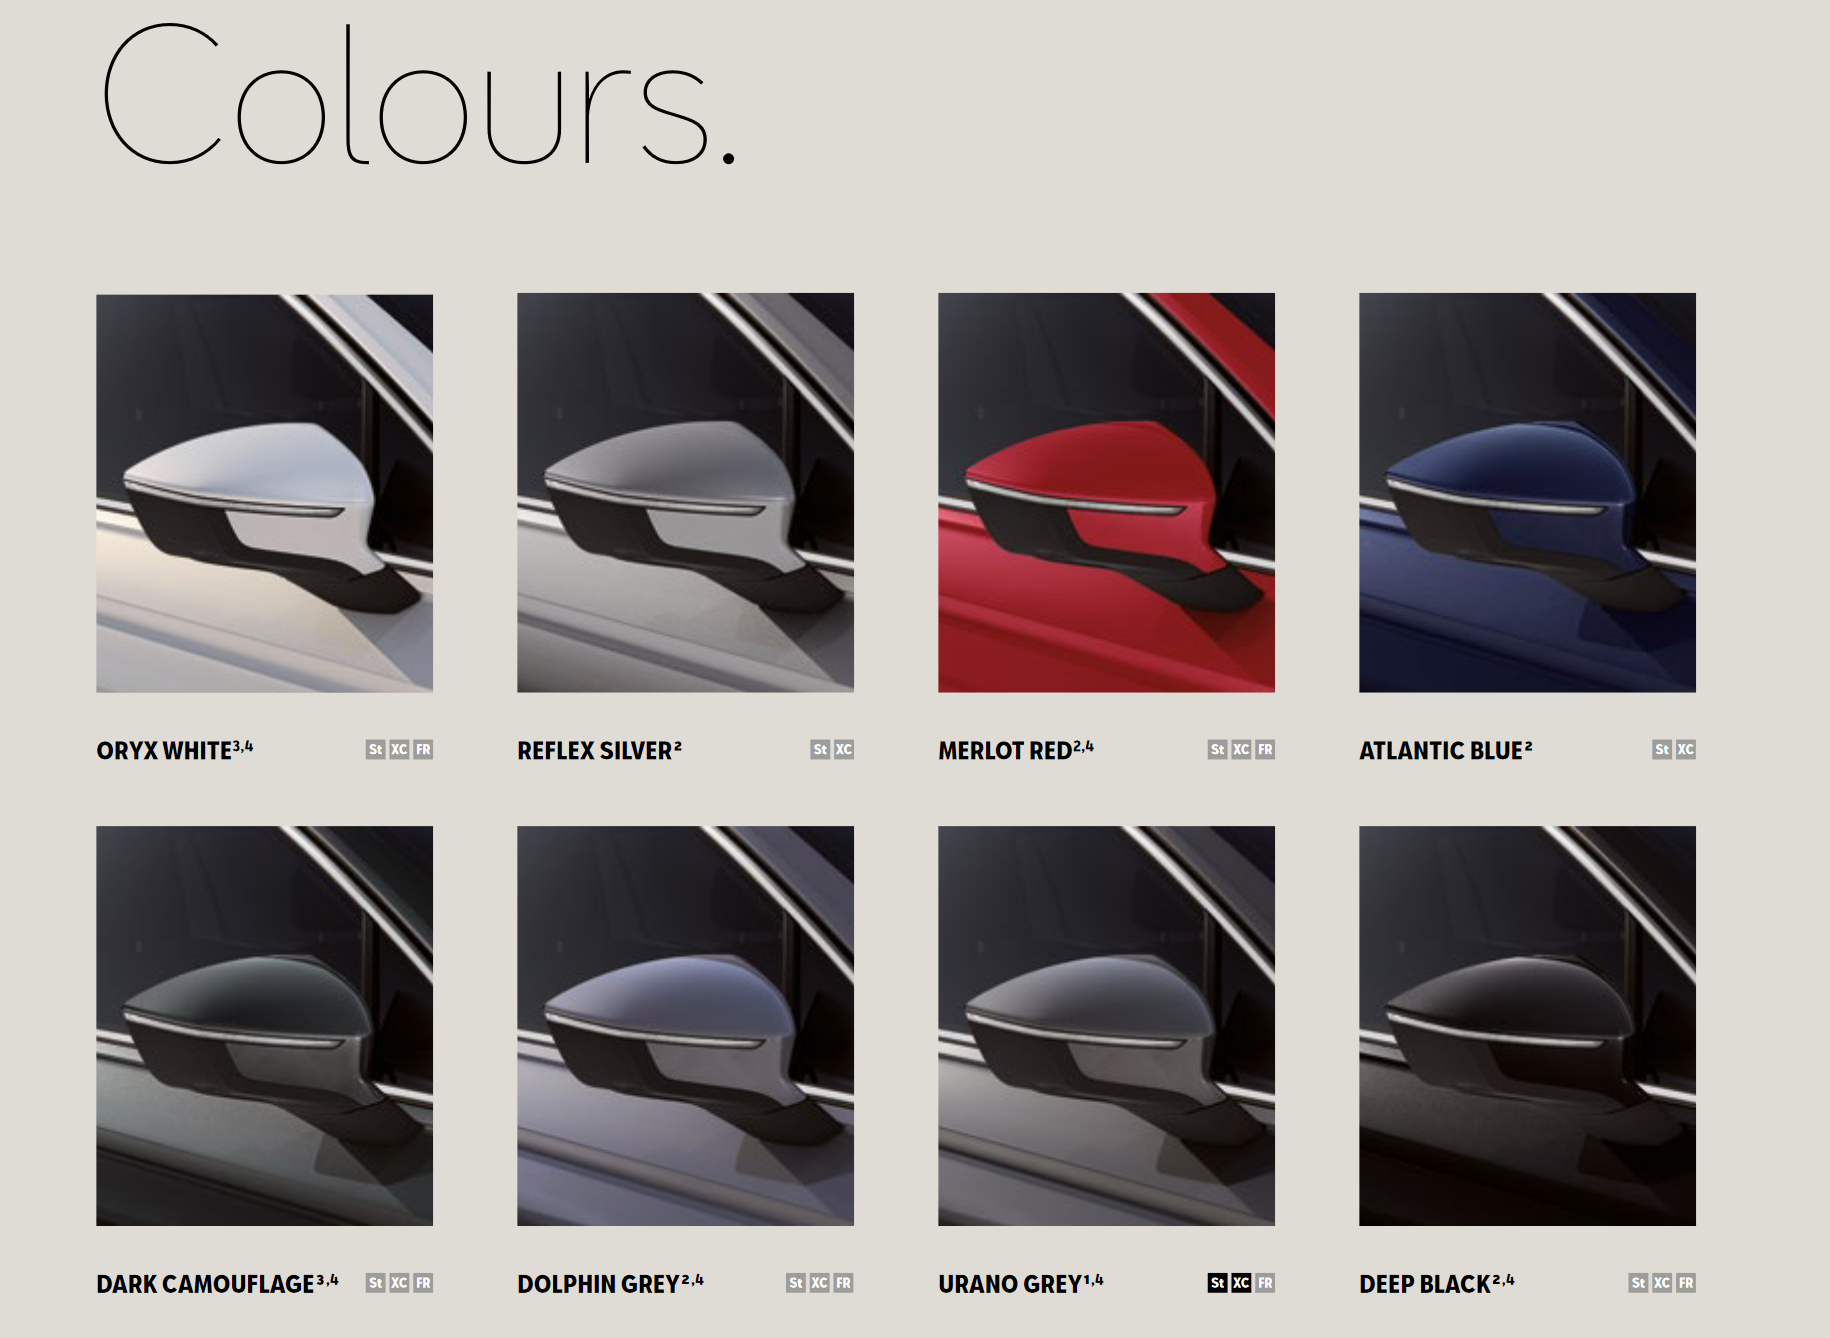 Exterior Color options that the Seat vehicle offered